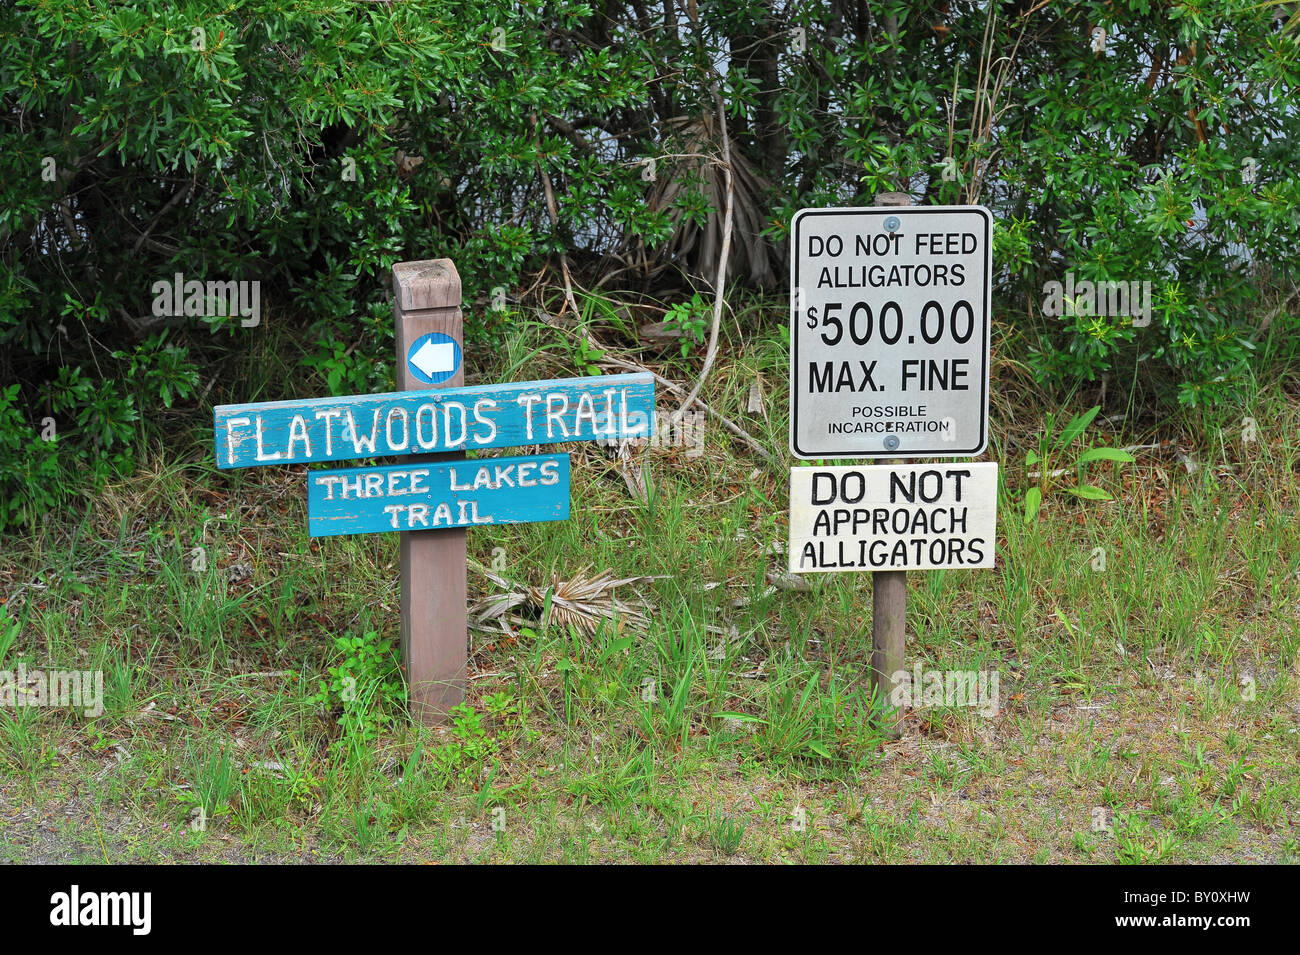 Sign warning of the danger of approaching Alligators and of the fine for feeding them at Flatwoods Trail, Florida. Stock Photo